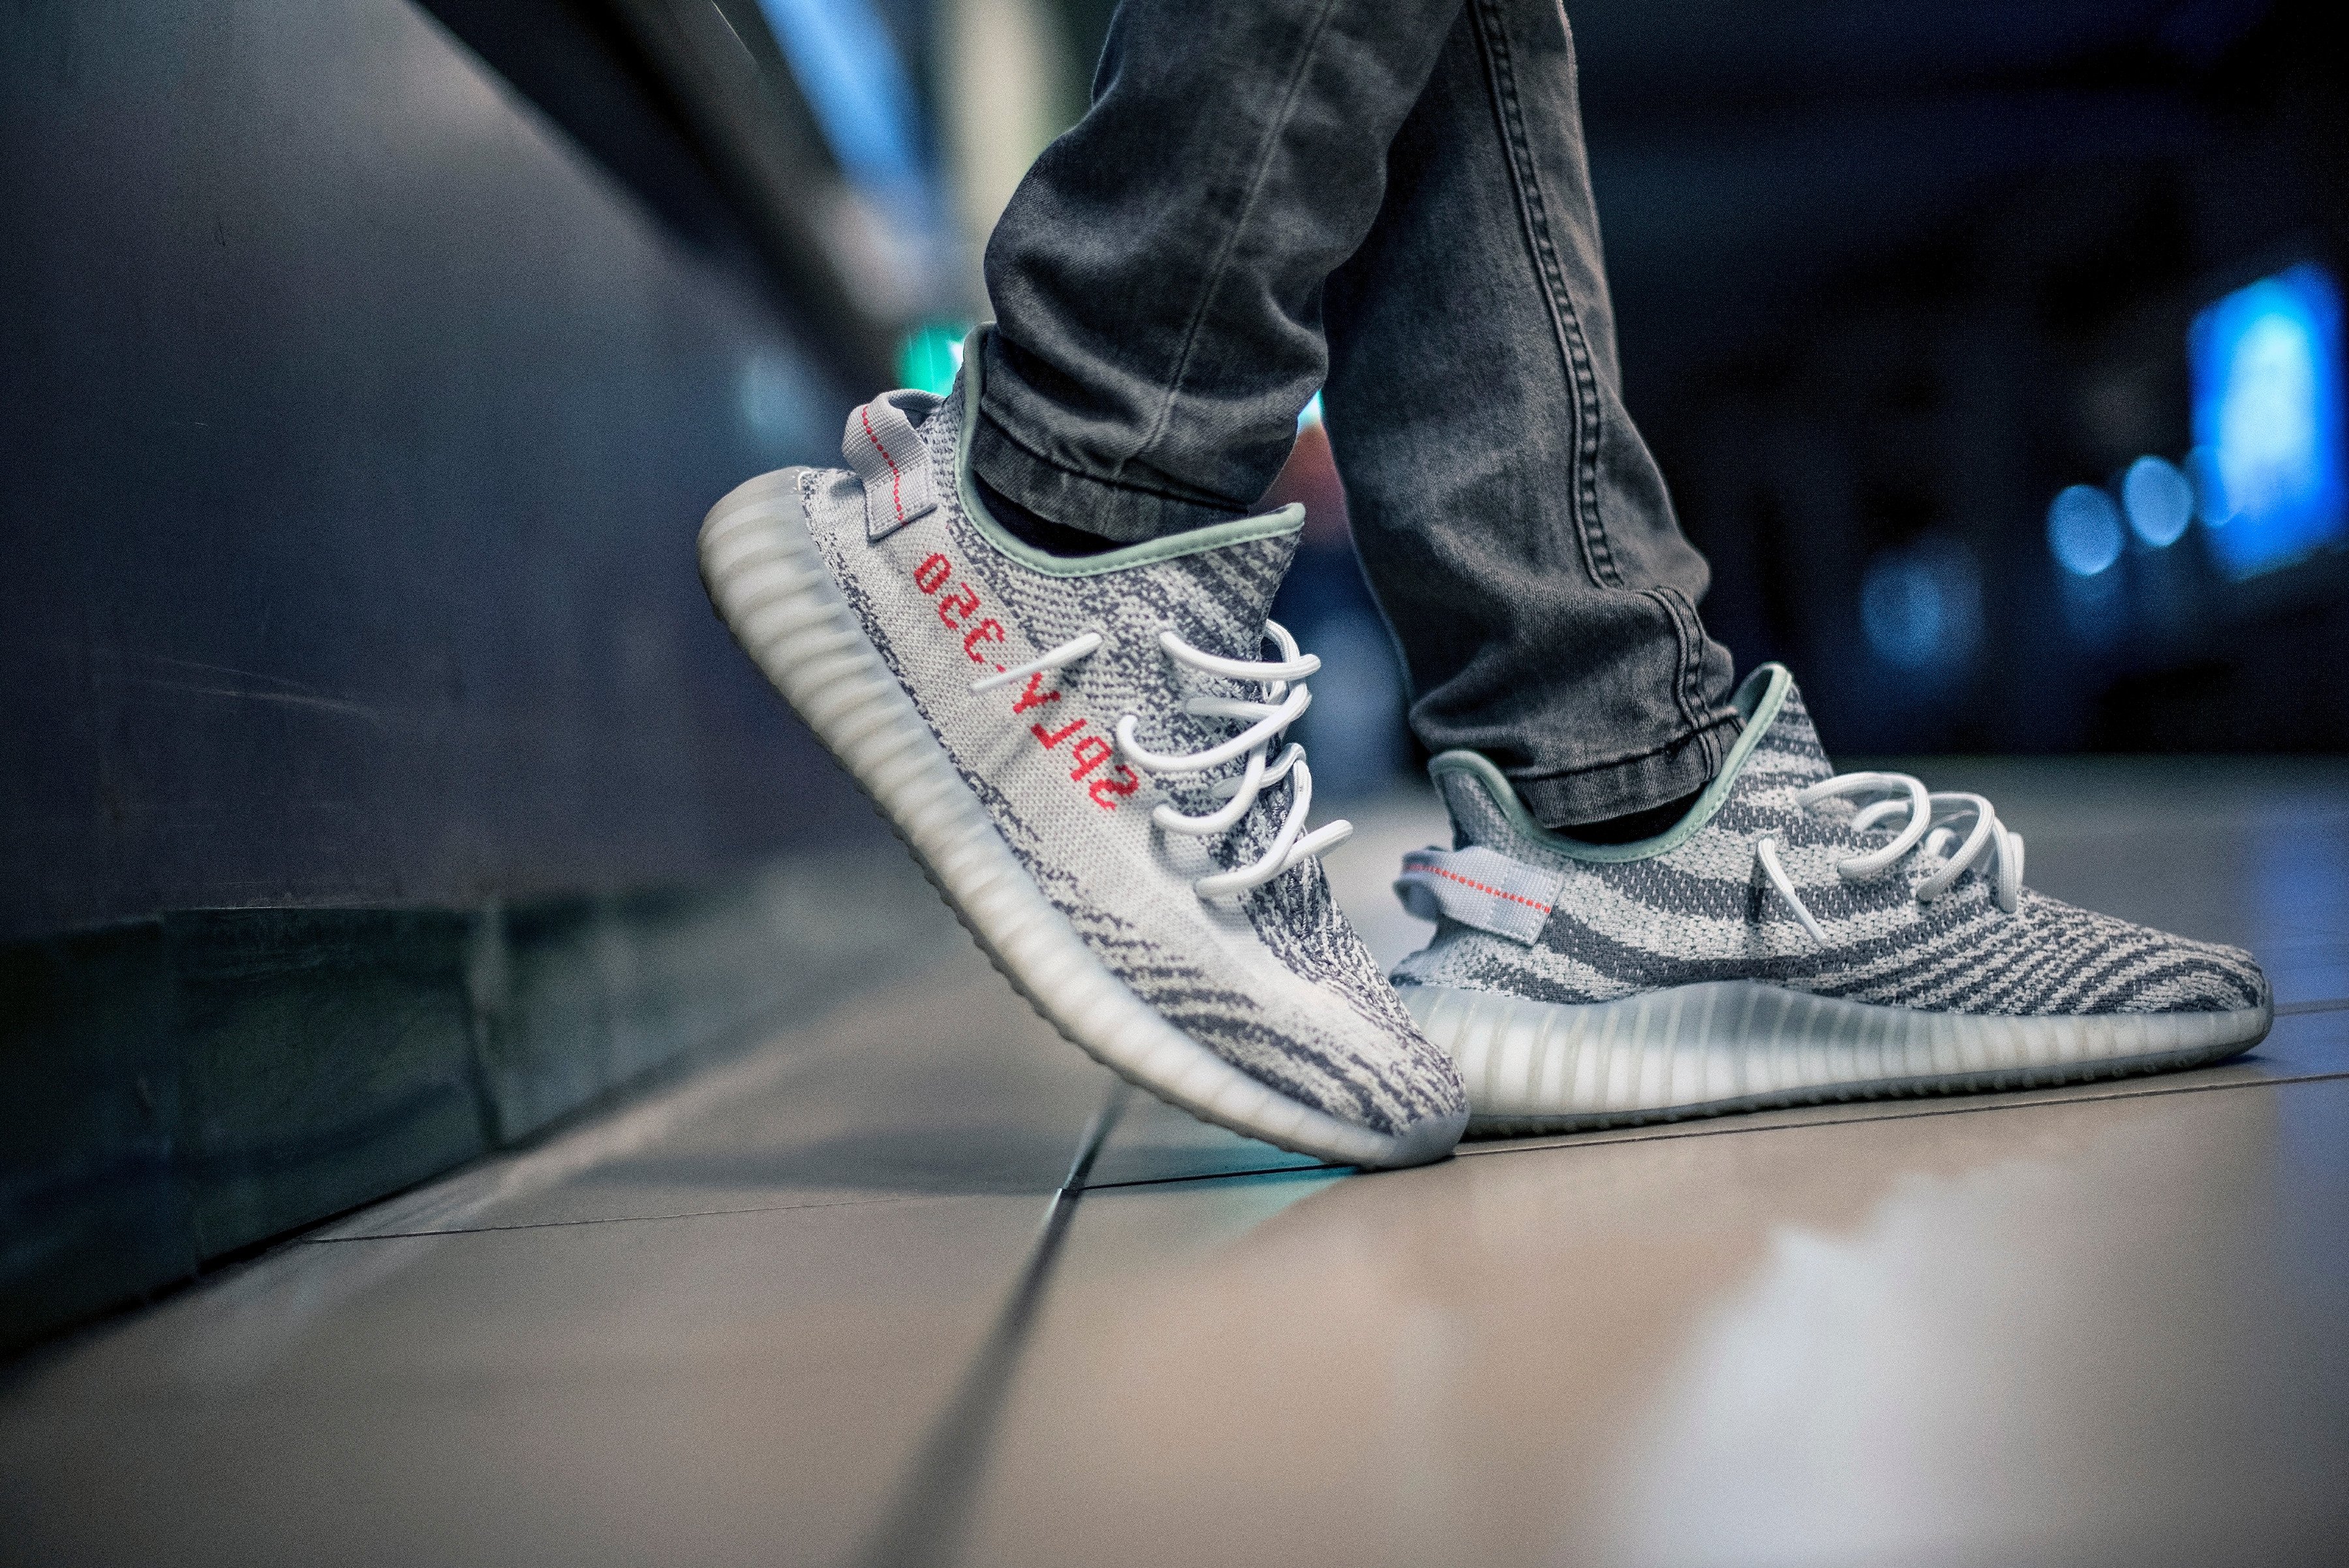 Adidas Yeezy sneakers fly off the shelves despite split with Kanye